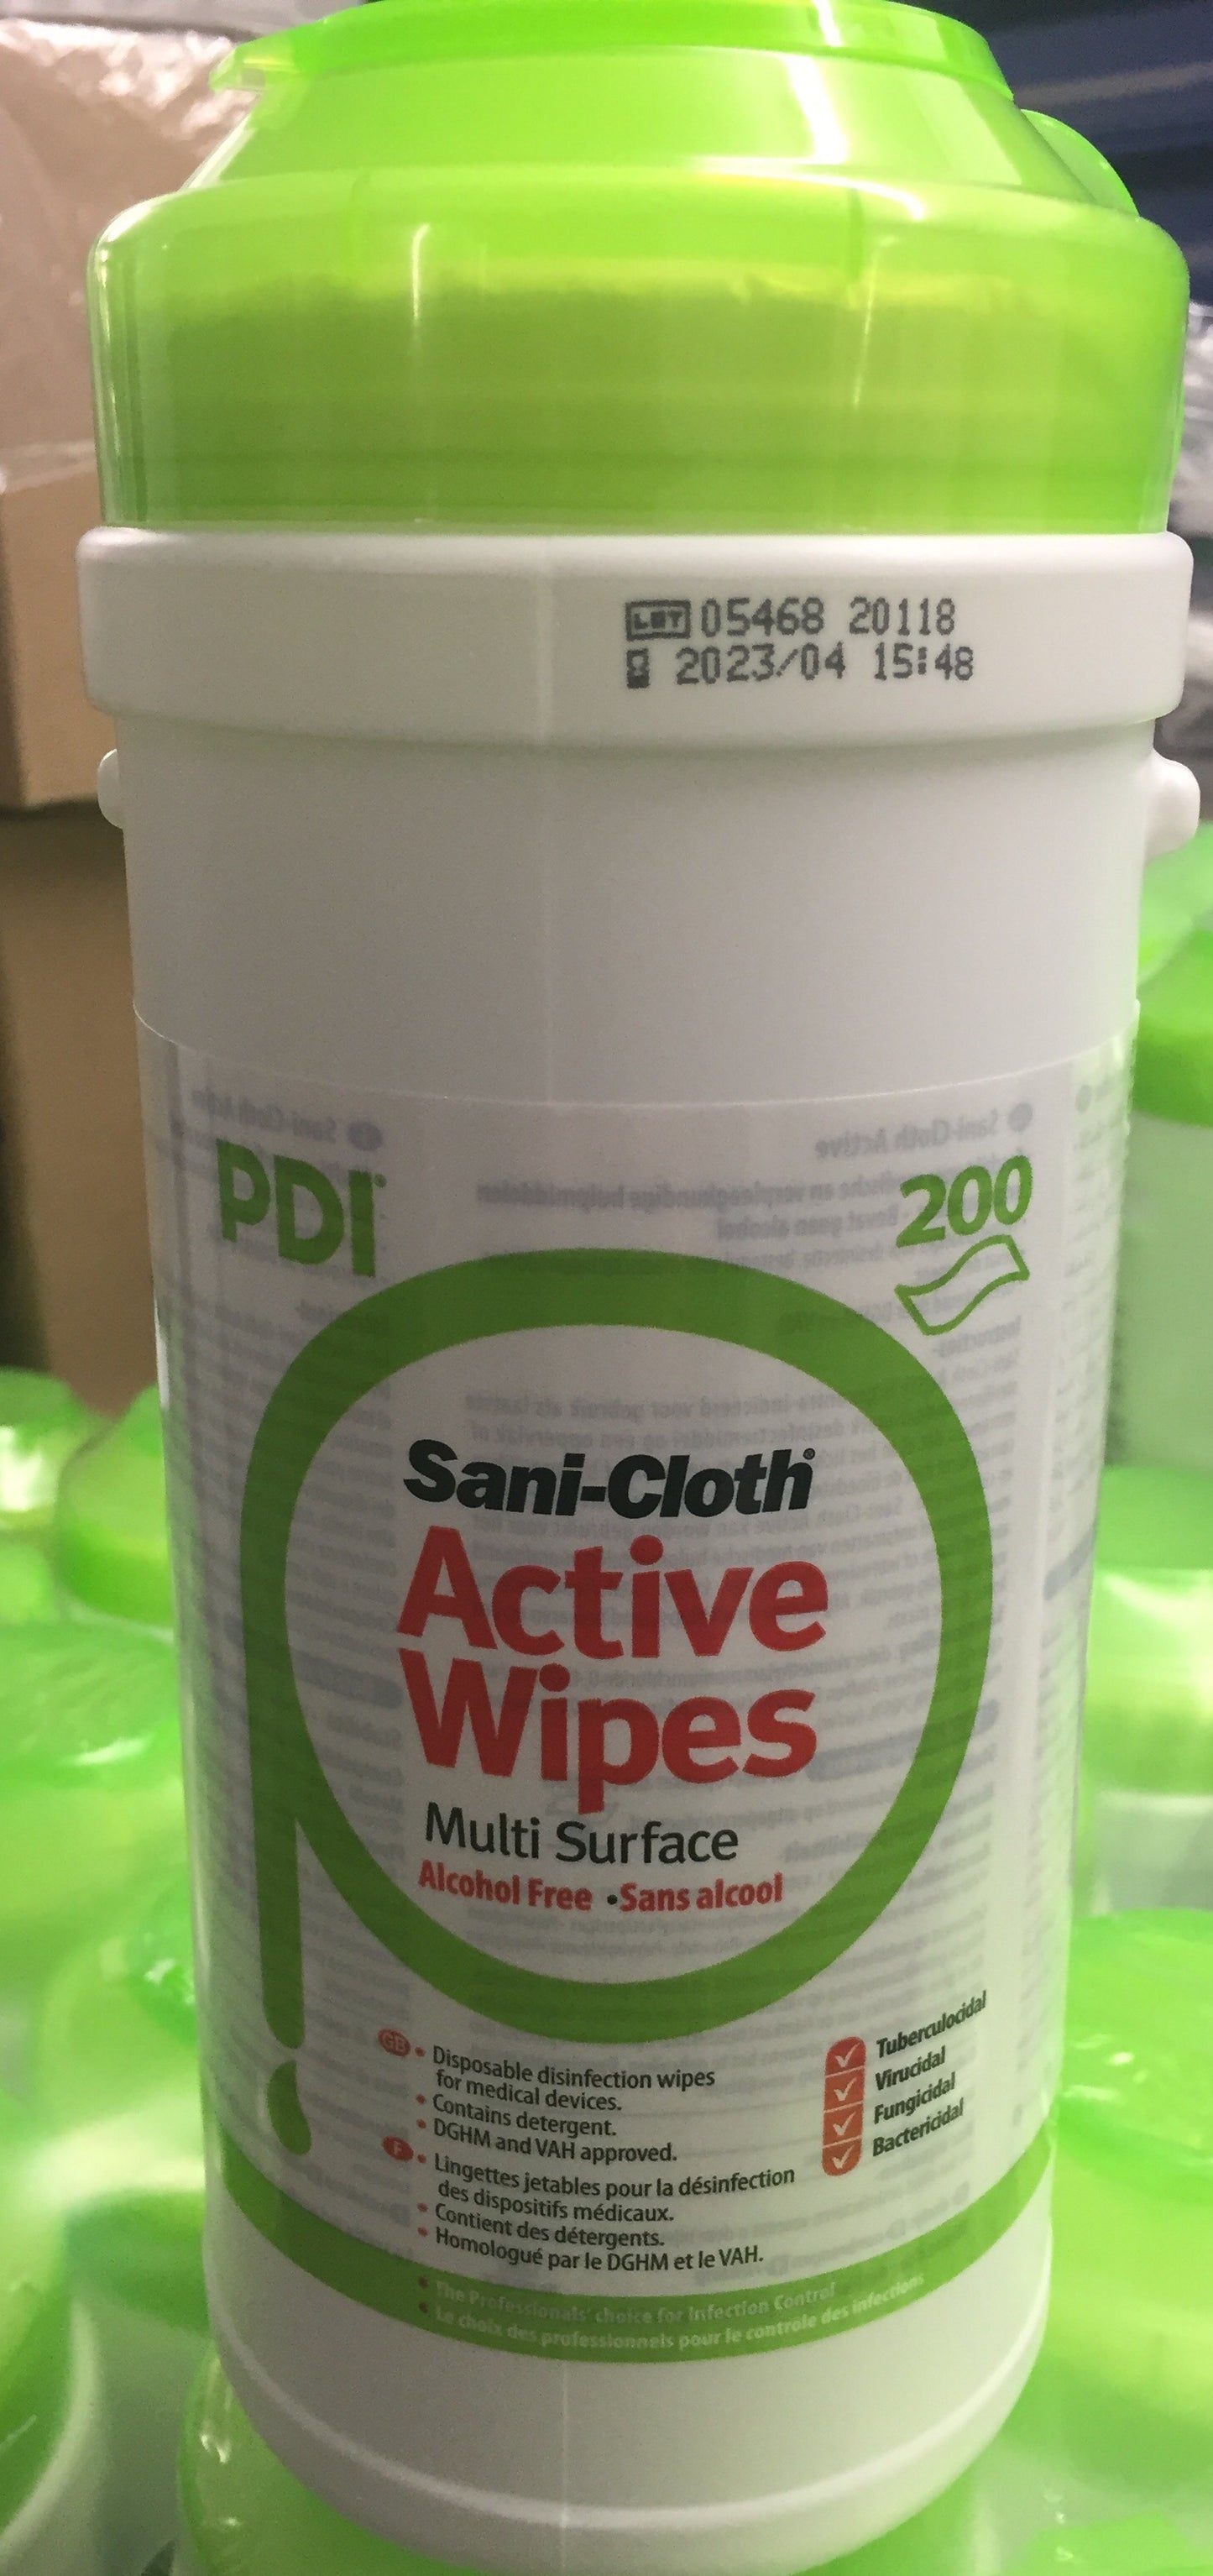 PDI Sani Cloth Disinfectant Wipe.  Active Detergent, Bactericidal, Multi Surface. Tub 200